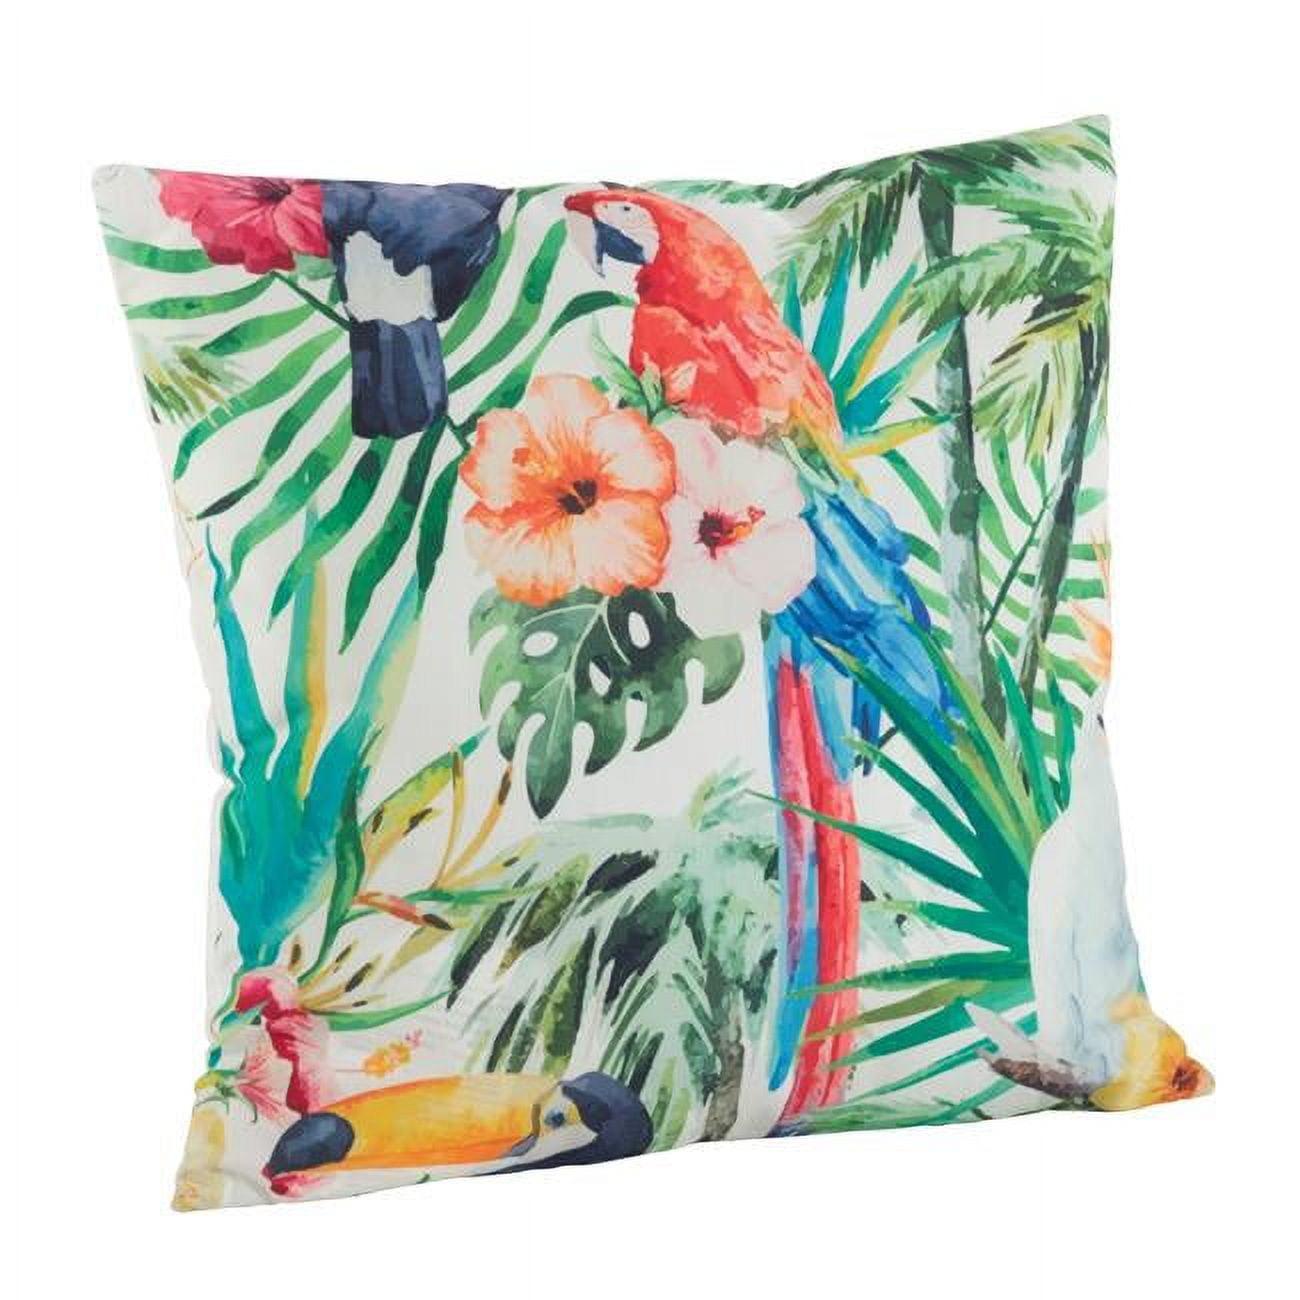 Tropical Bloom 18" Square Embroidered Throw Pillow Set